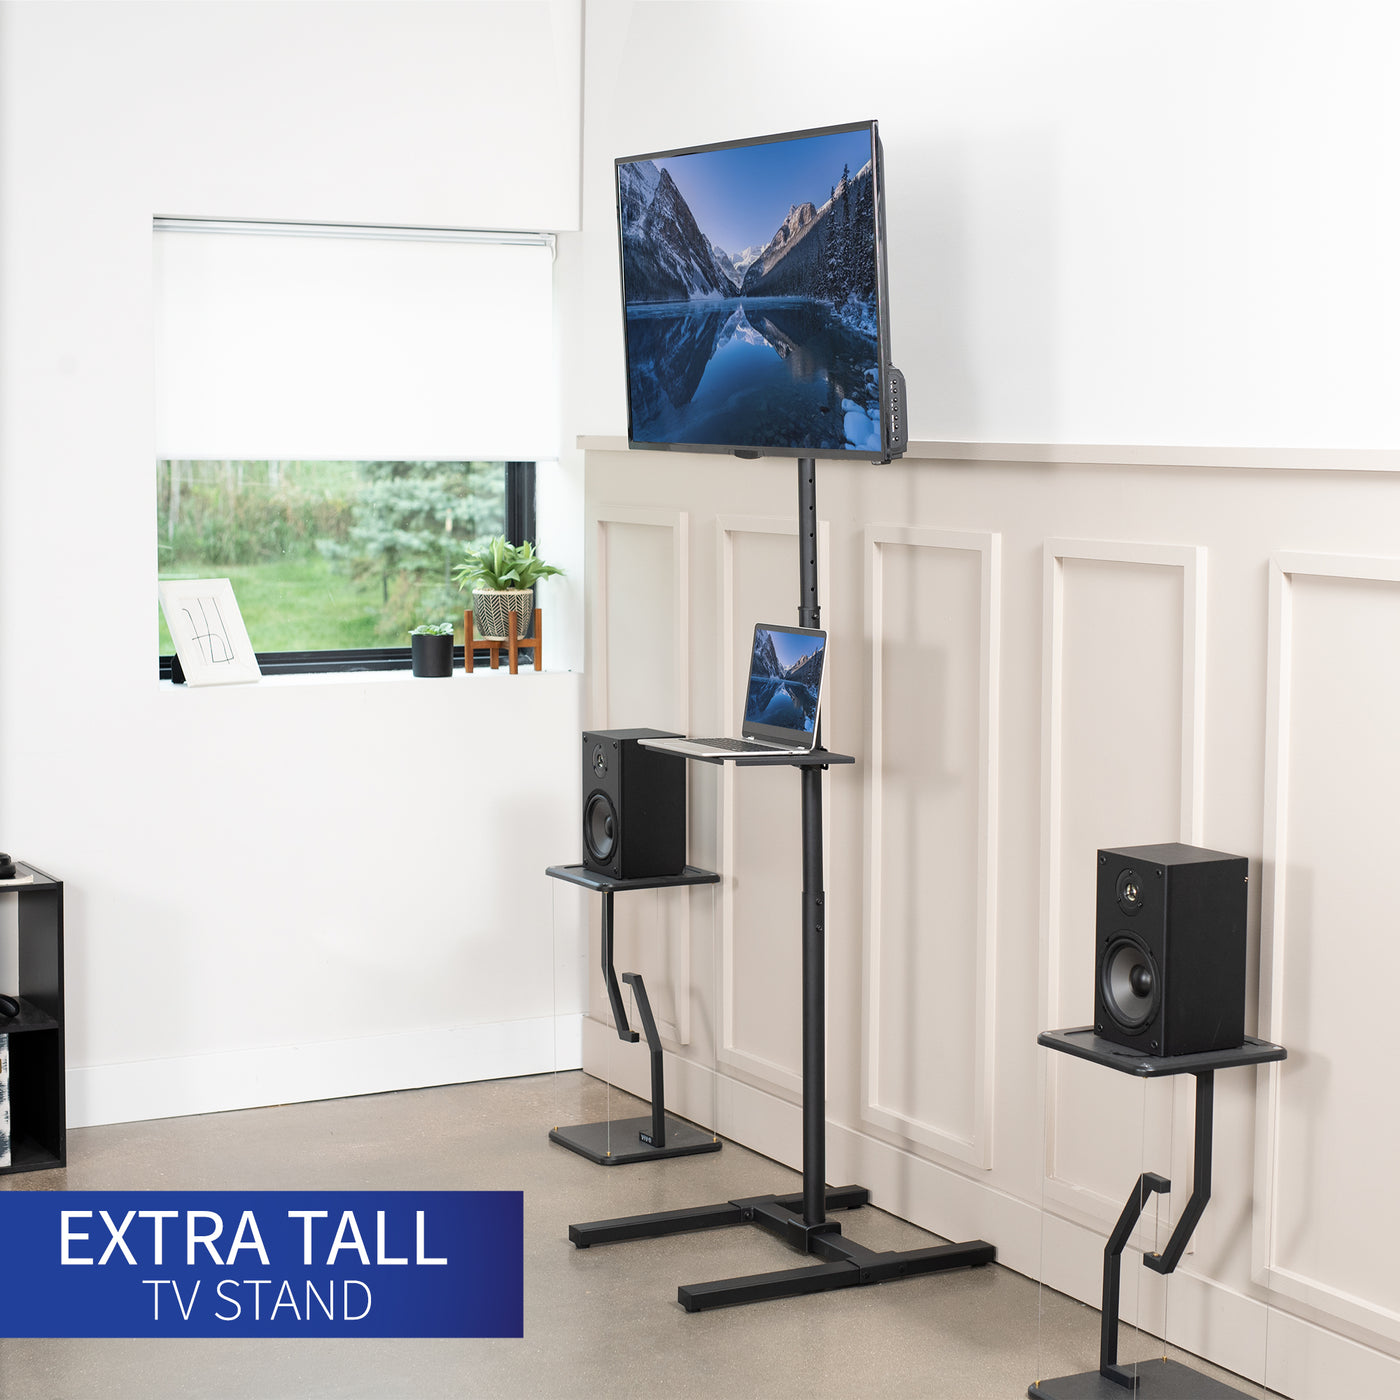 Extra tall tilting height adjustable TV stand with media shelf.